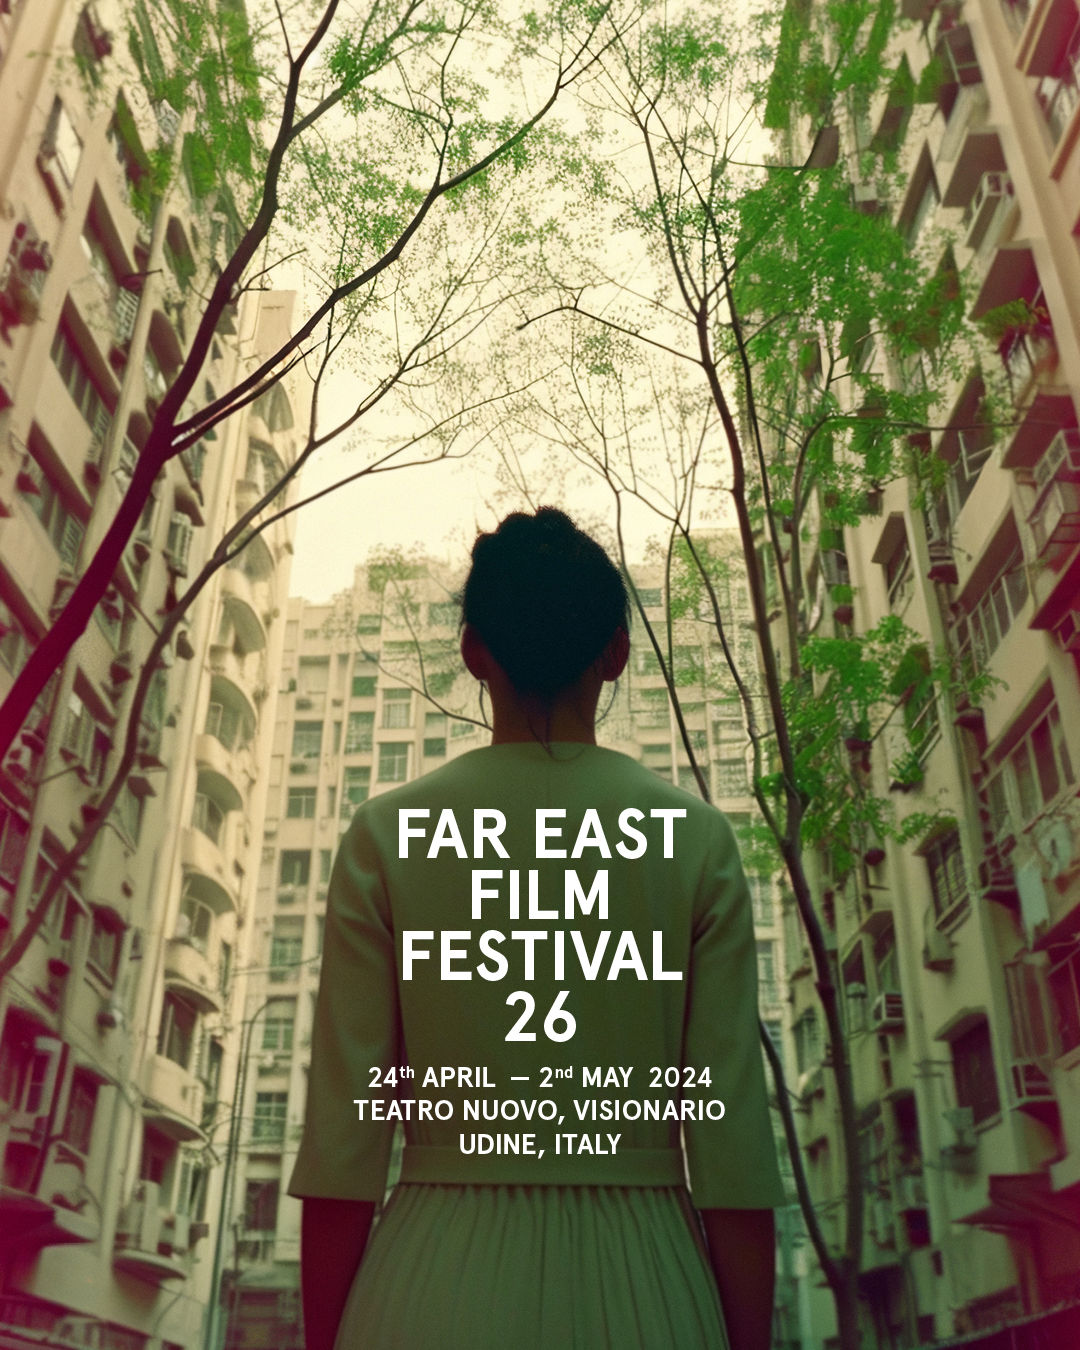 It’s time for the Far East Film Festival: the twenty-sixth edition officially opens on Wednesday 24 April!